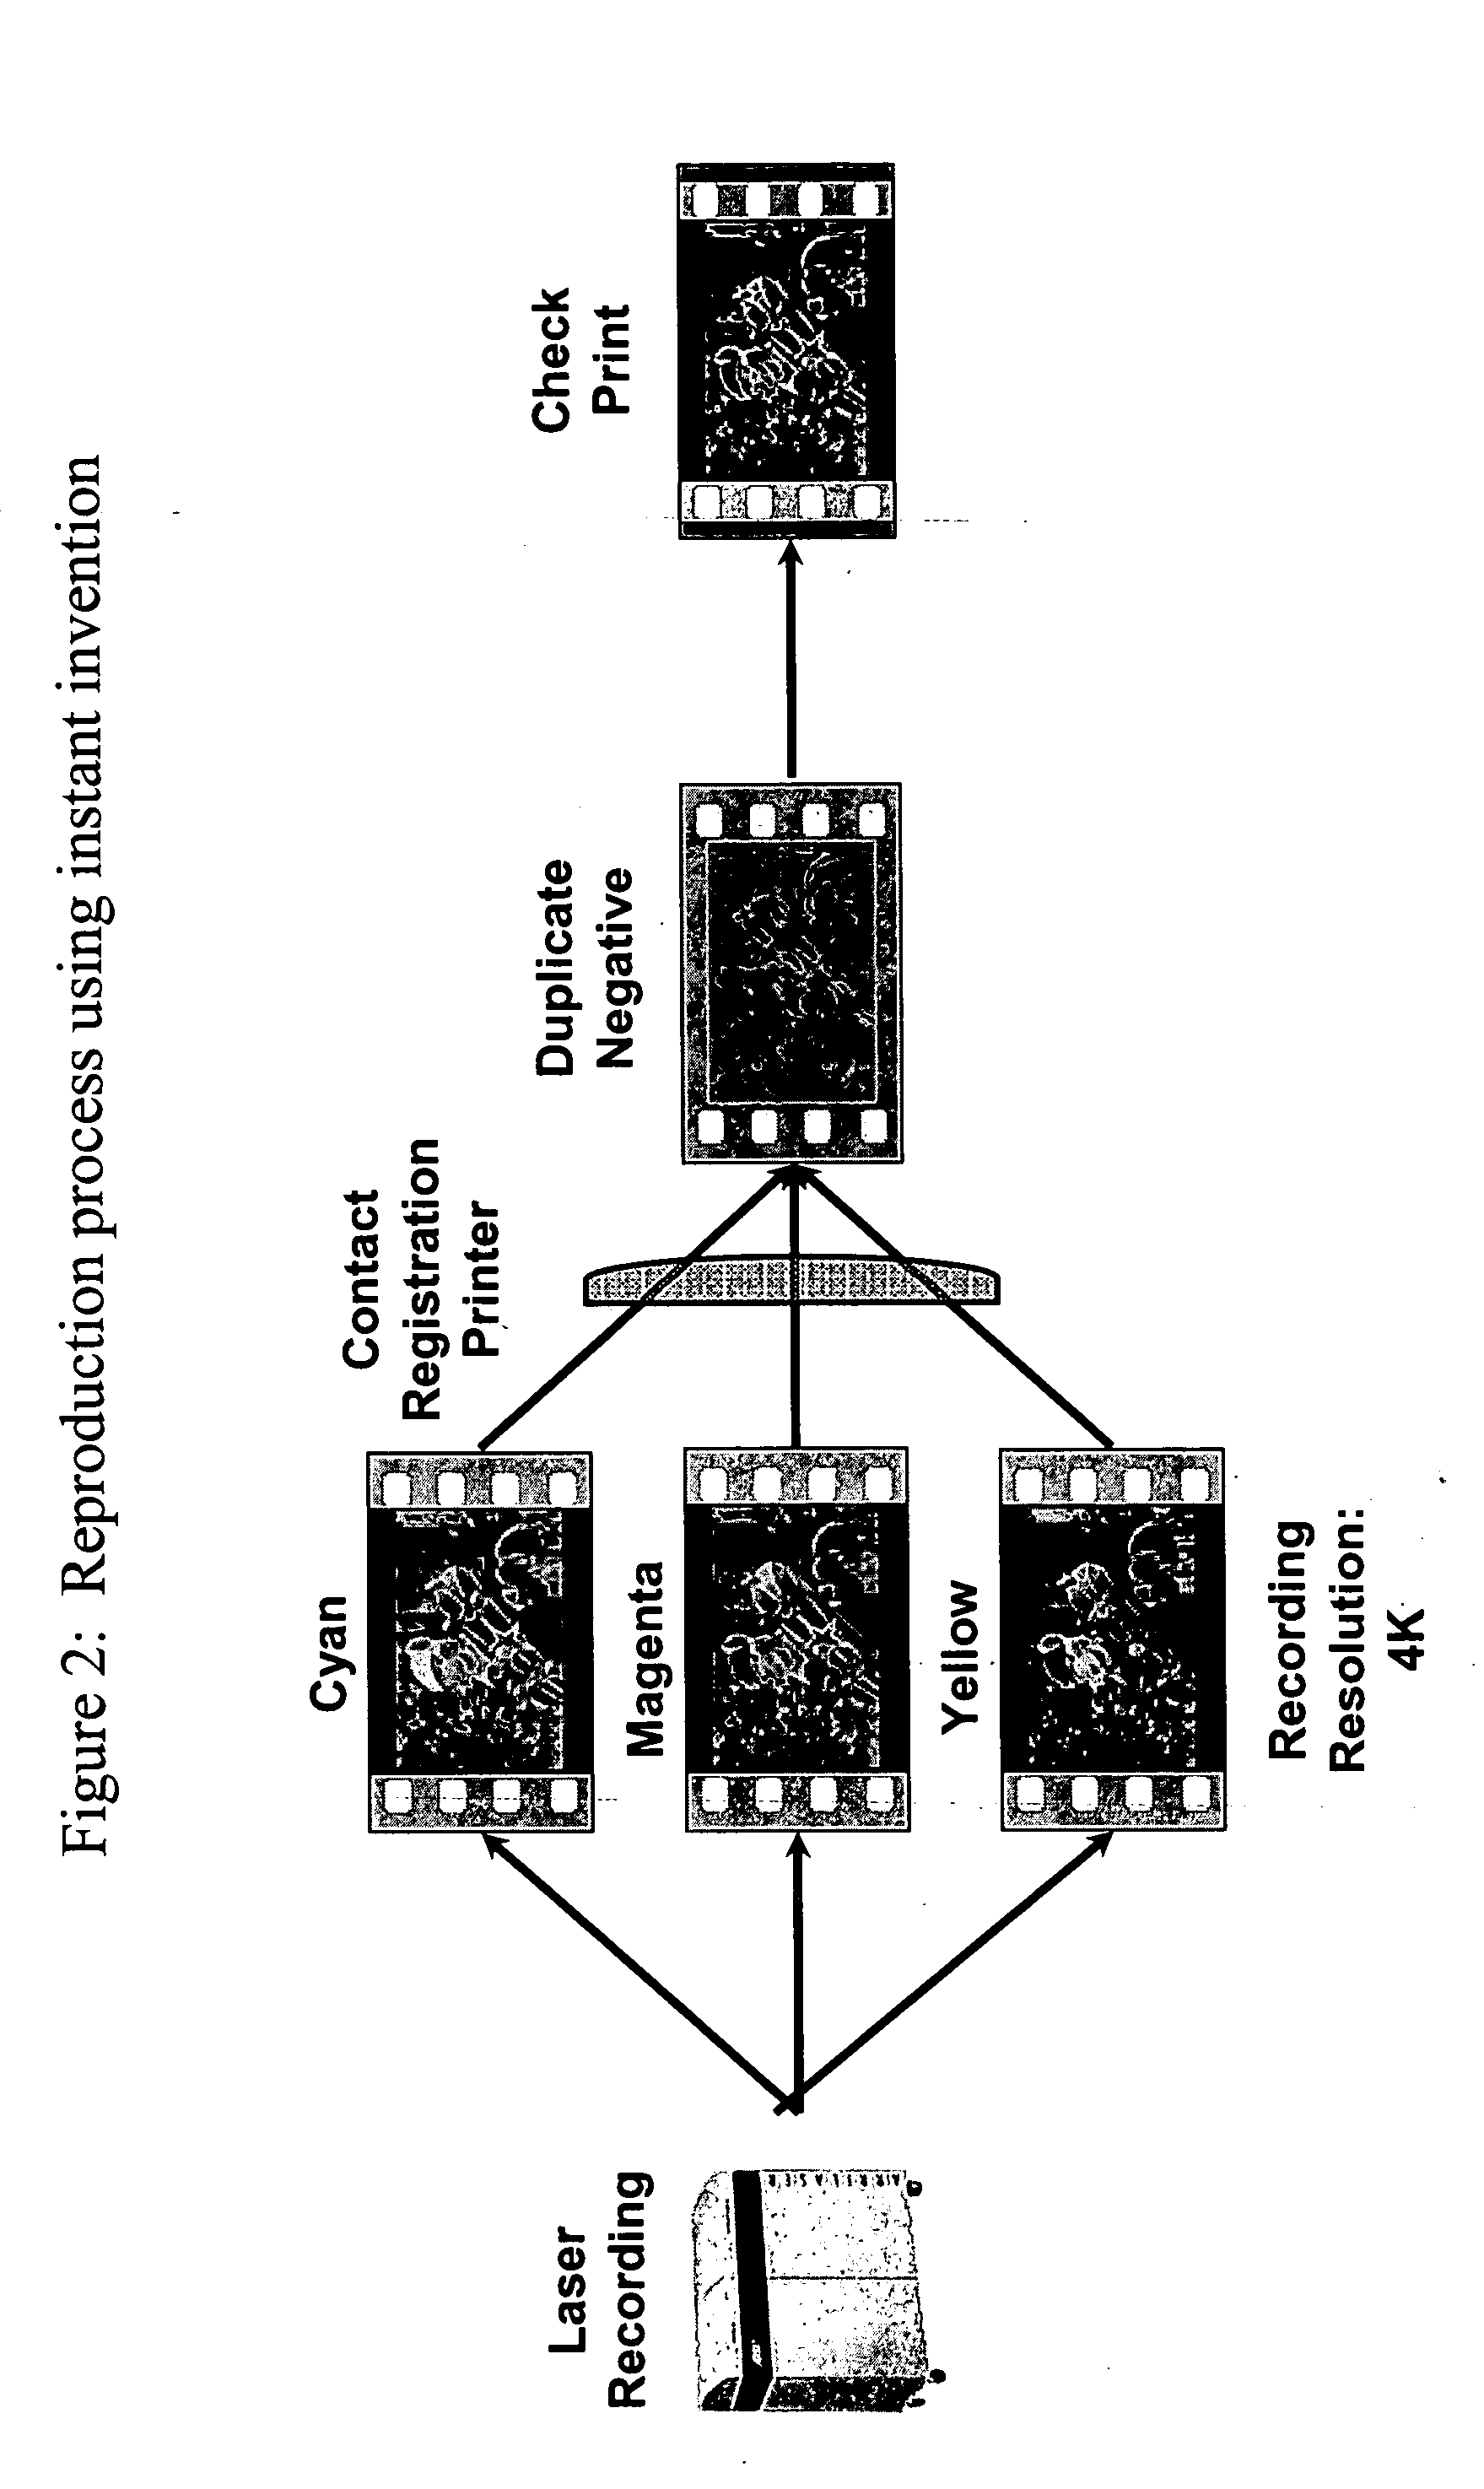 Method for conversion and reproduction of film images through a digital process